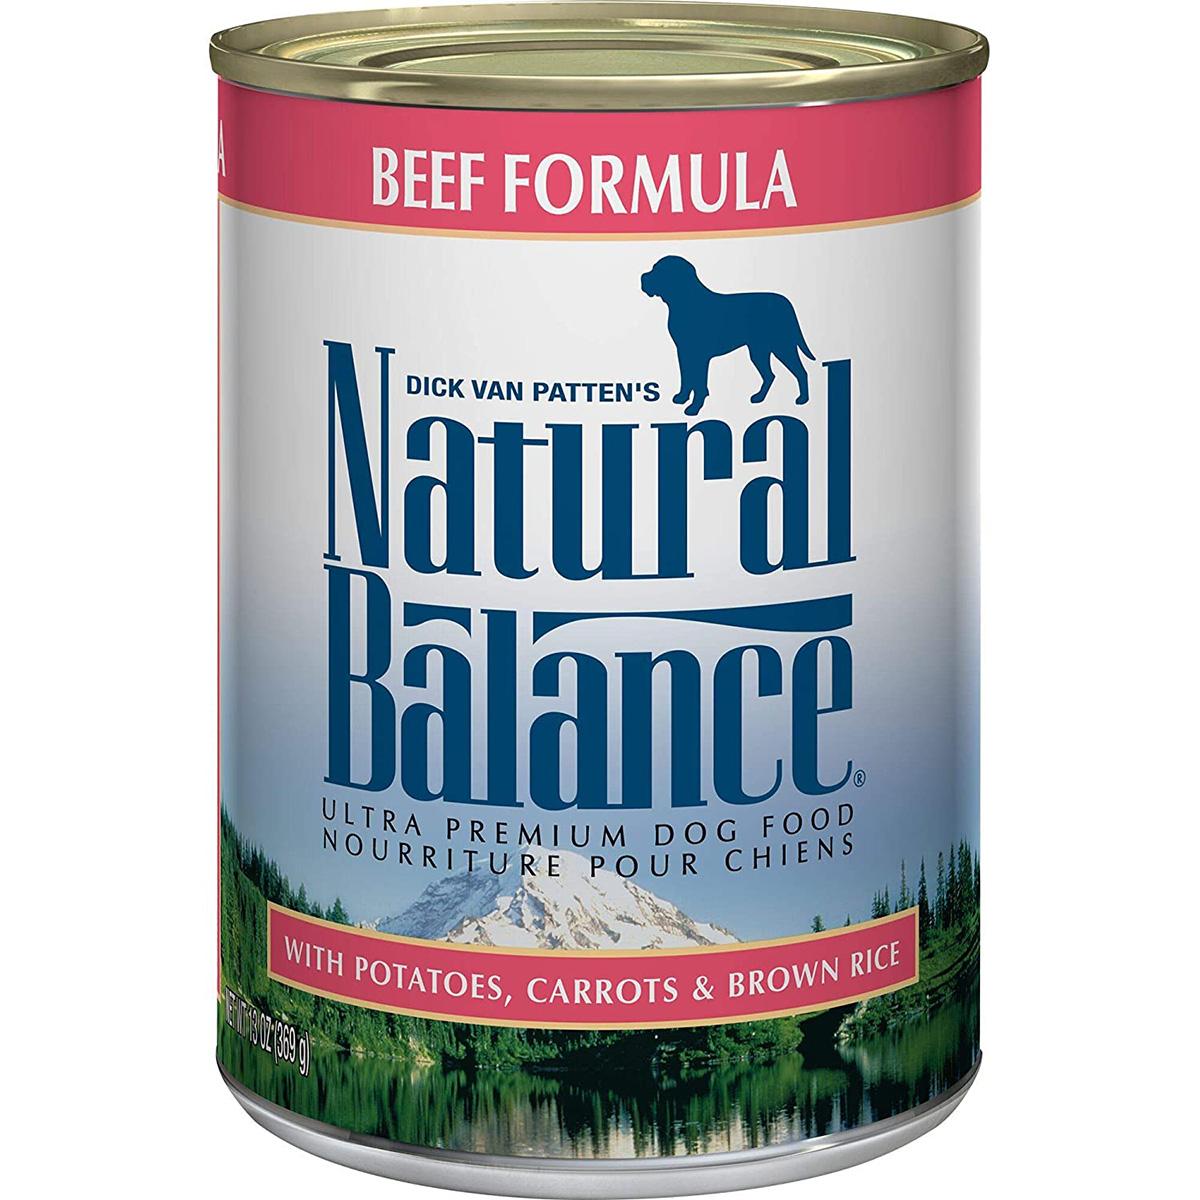 12 Natural Balance Ultra Premium Beef Formula Canned Dog Food for $13.30 Shipped